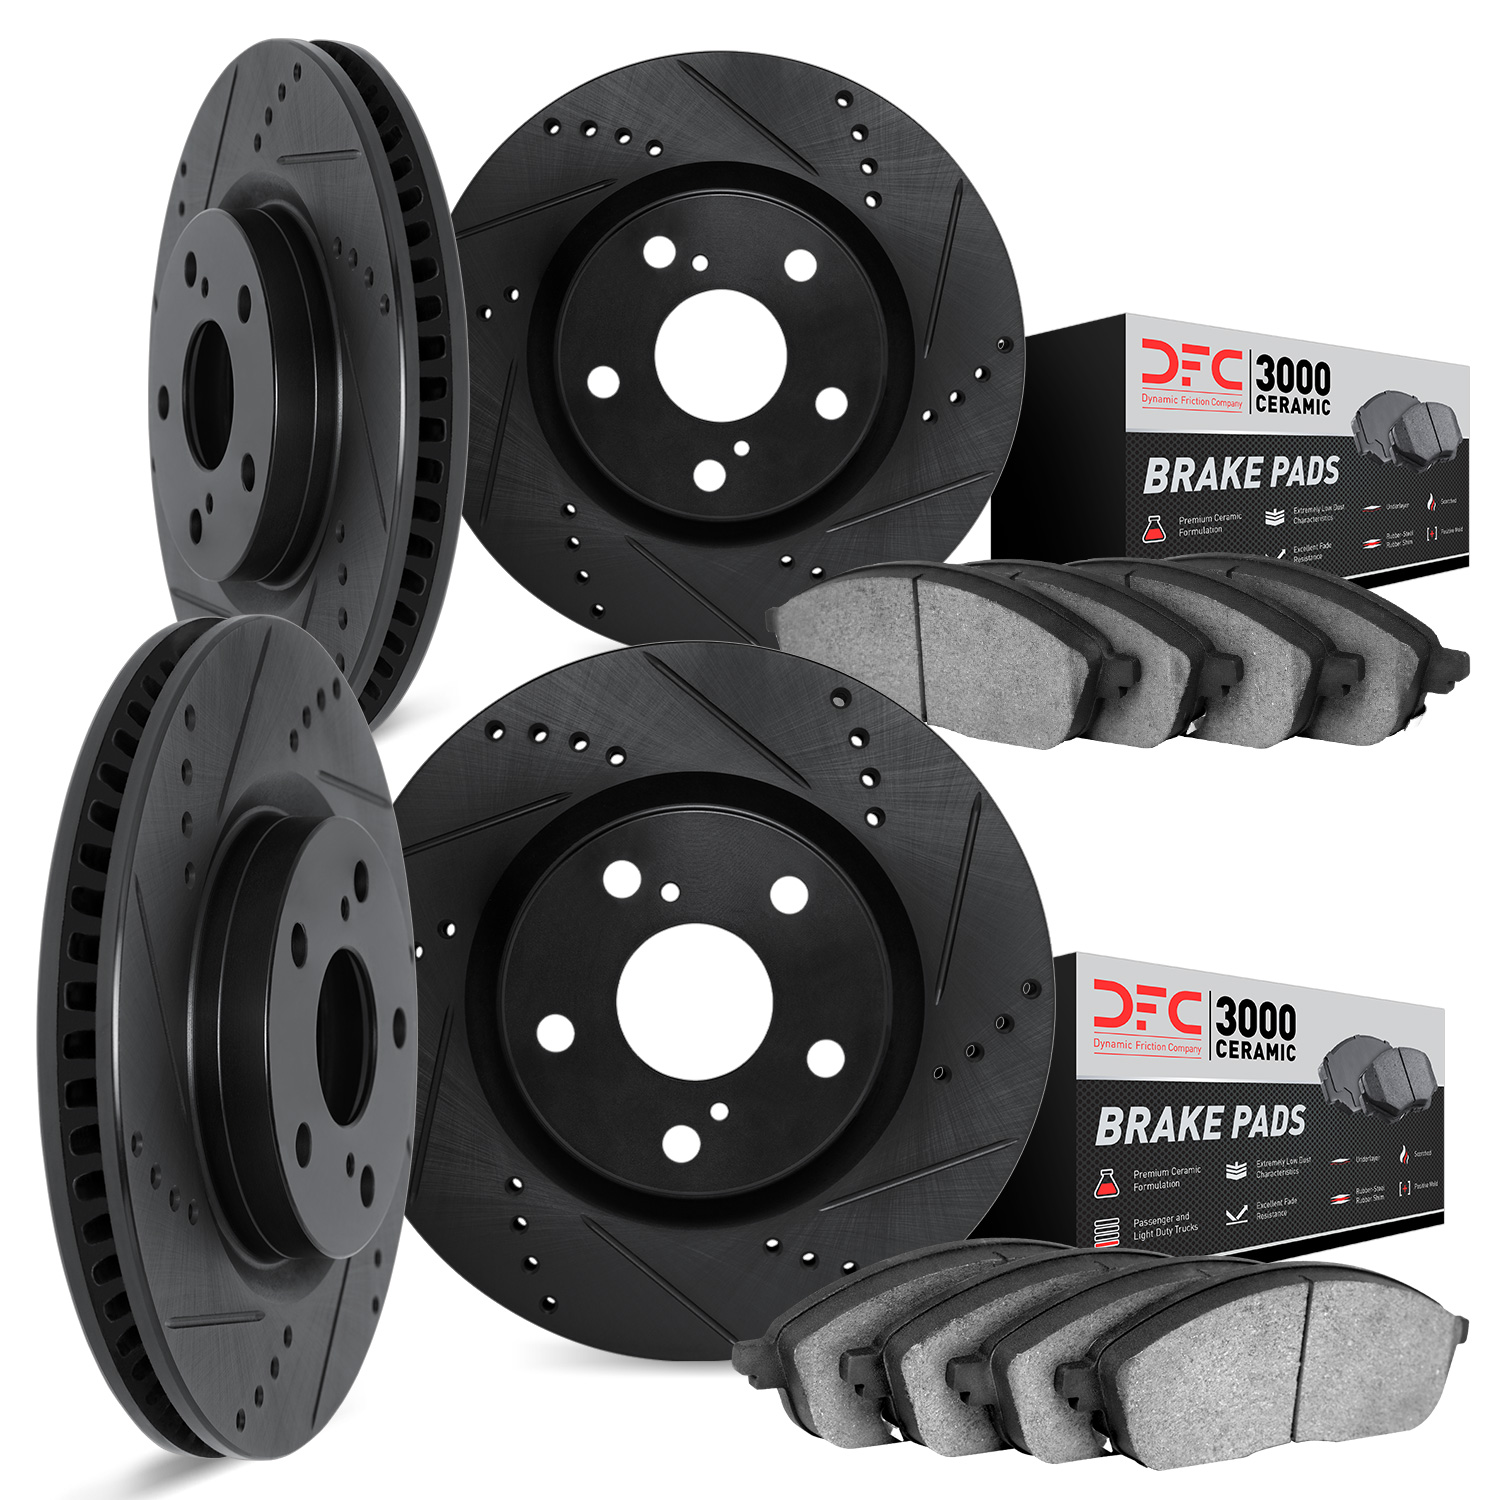 8304-31095 Drilled/Slotted Brake Rotors with 3000-Series Ceramic Brake Pads Kit [Black], Fits Select BMW, Position: Front and Re